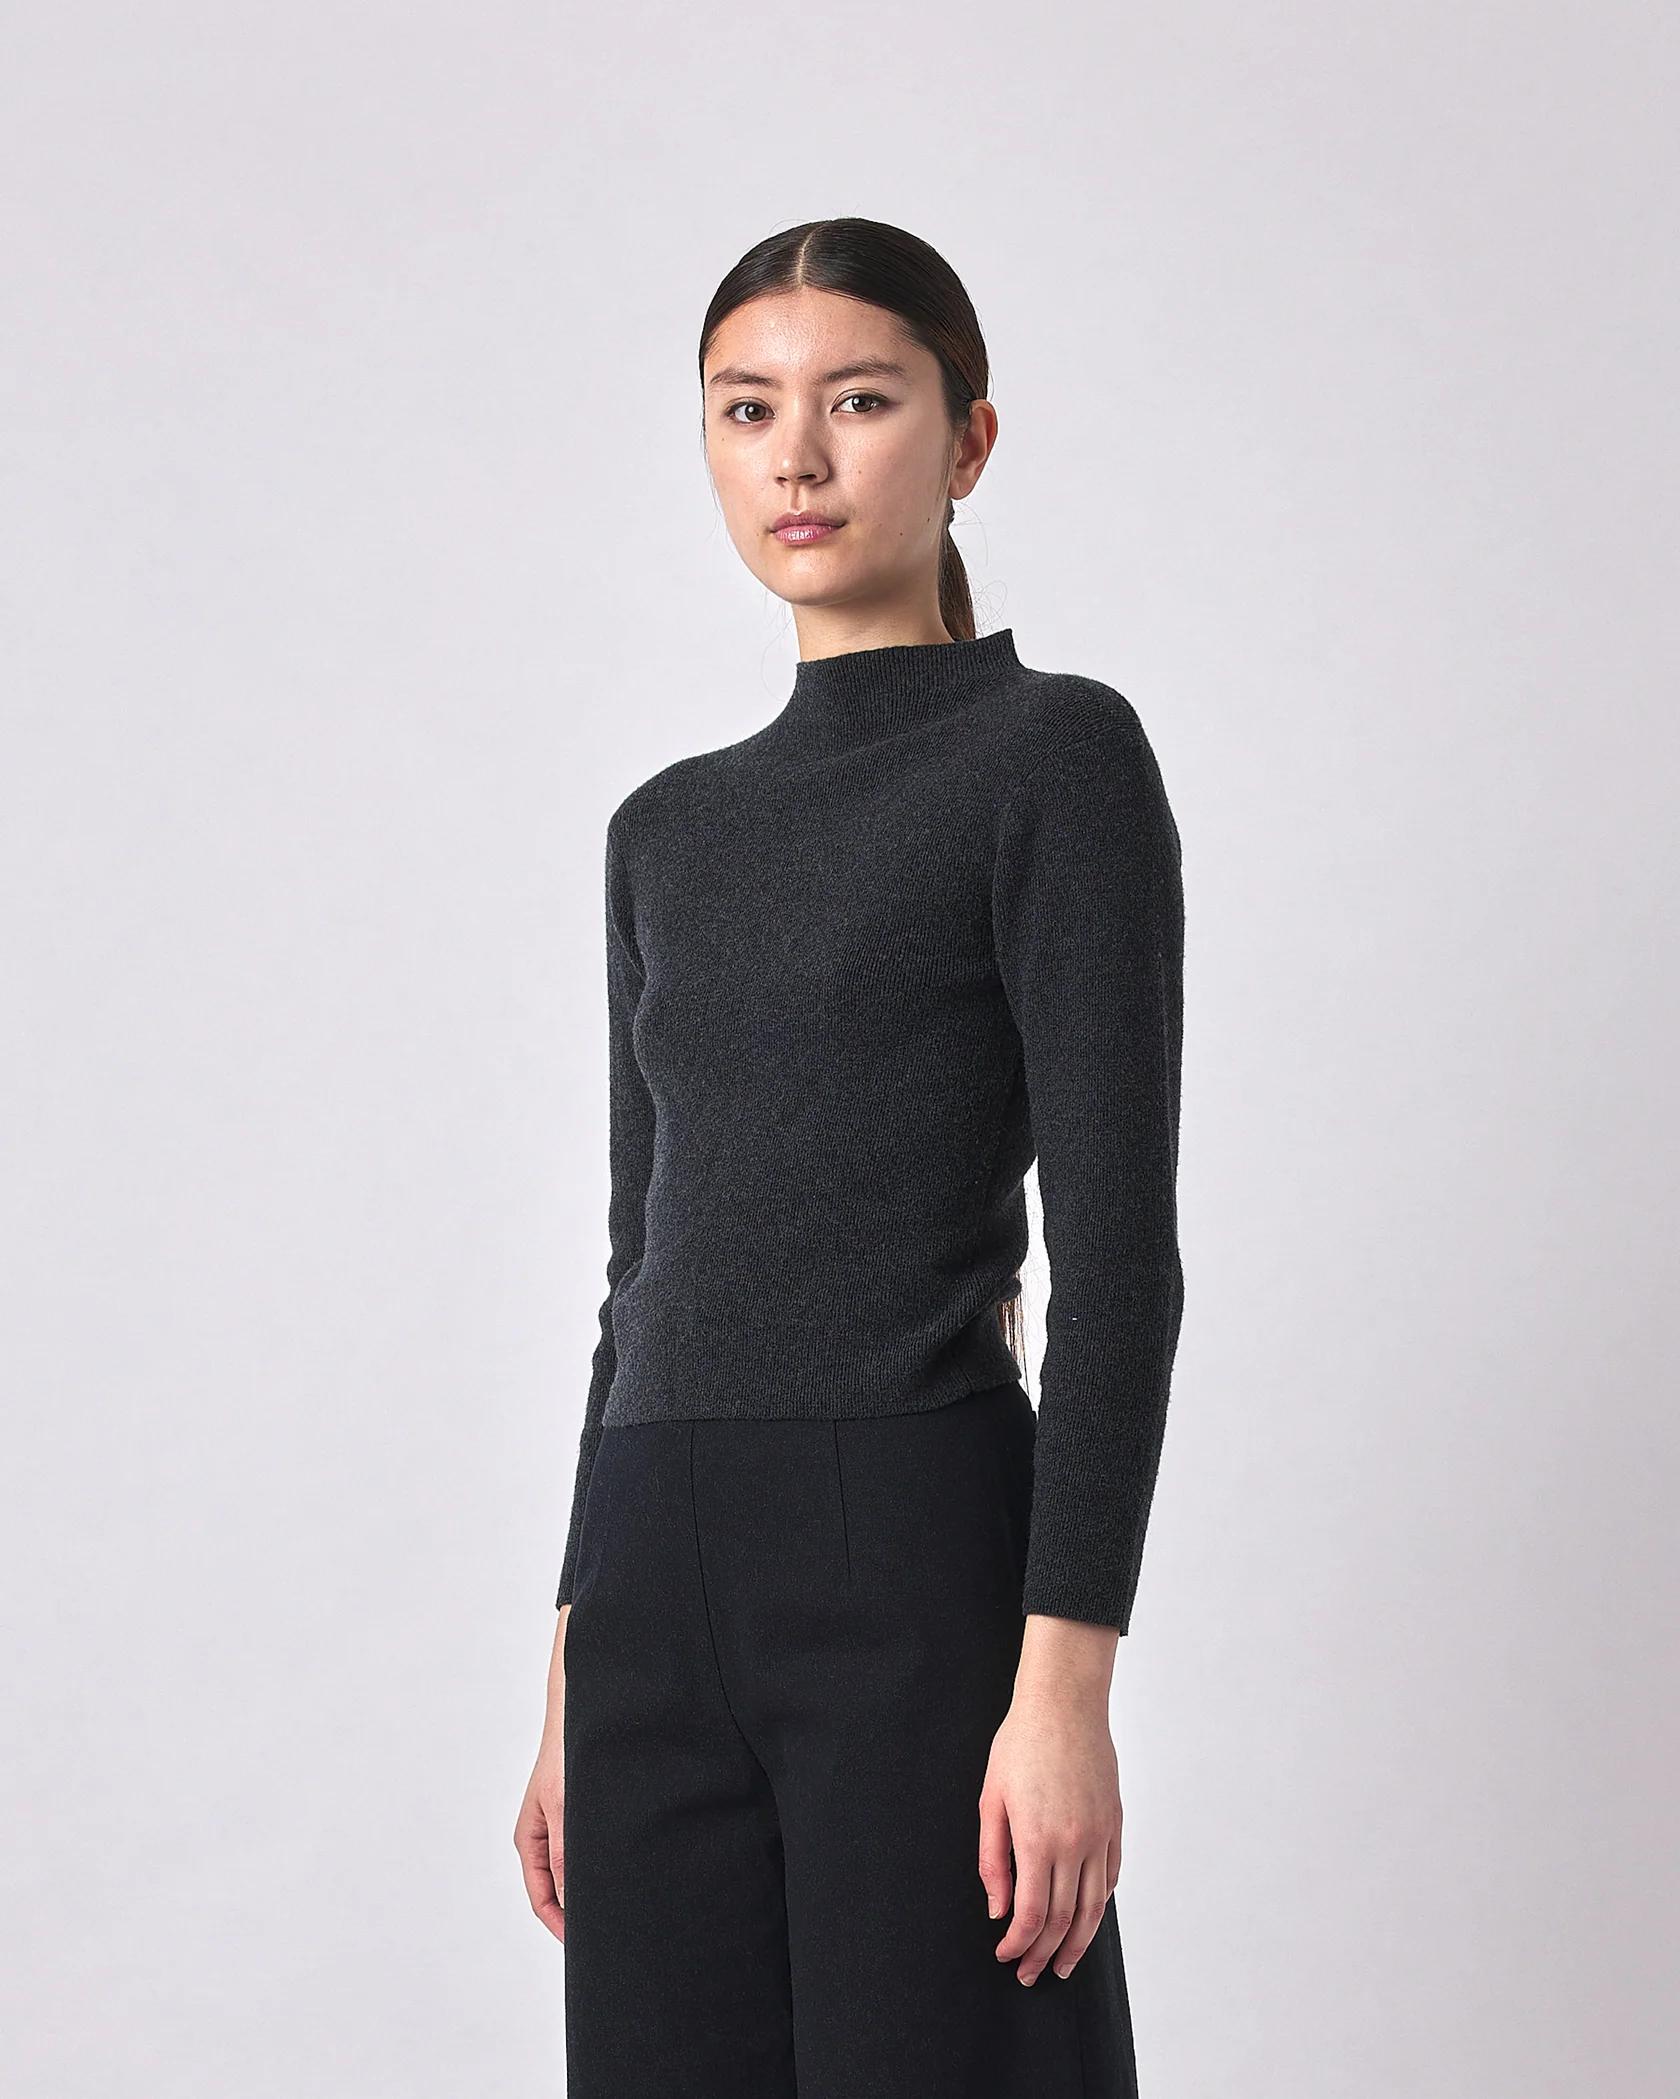 Product Image for Signature Mock-Neck Long-Sleeves, Charcoal Gray